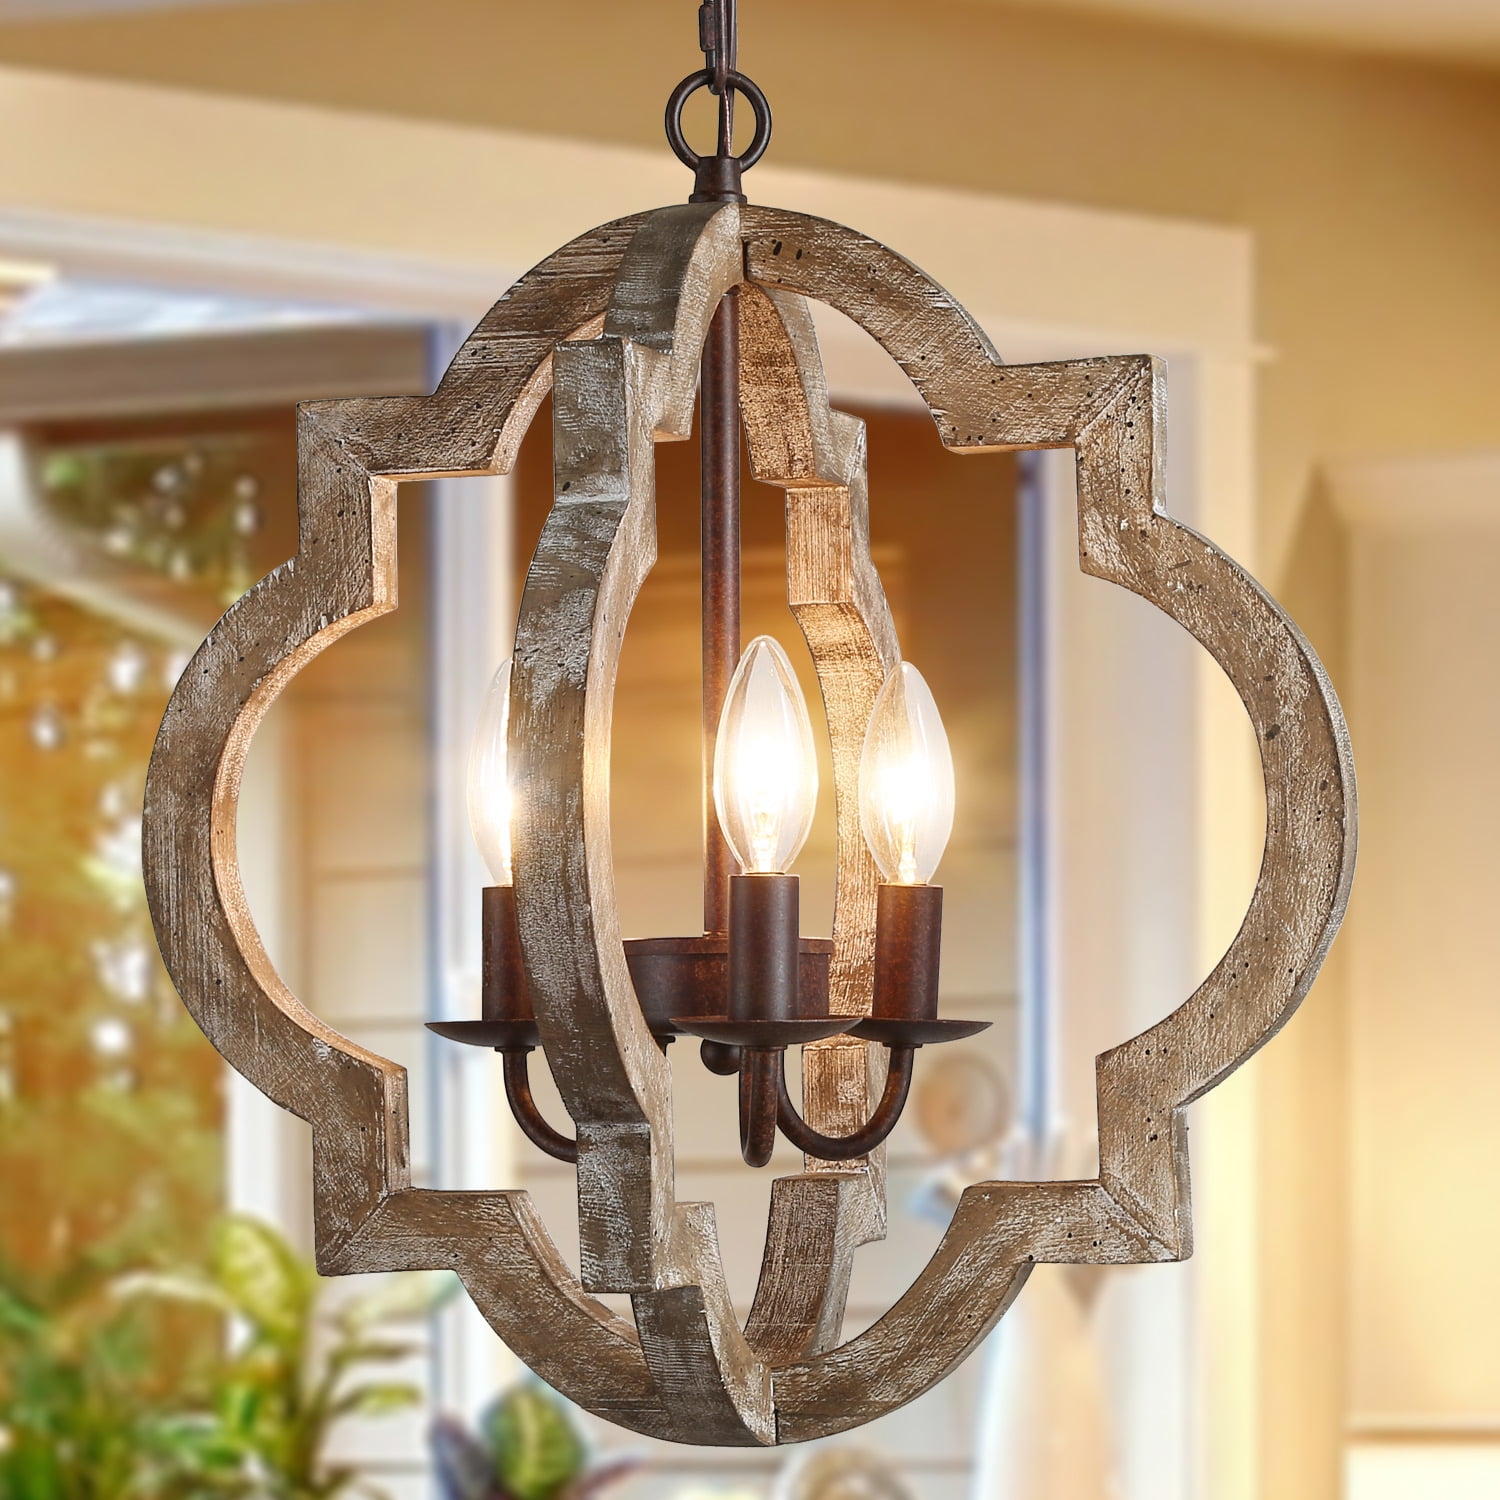 Lnc Farmhouse Rustic Chandeliers 3, Rustic Light Fixtures For Living Room